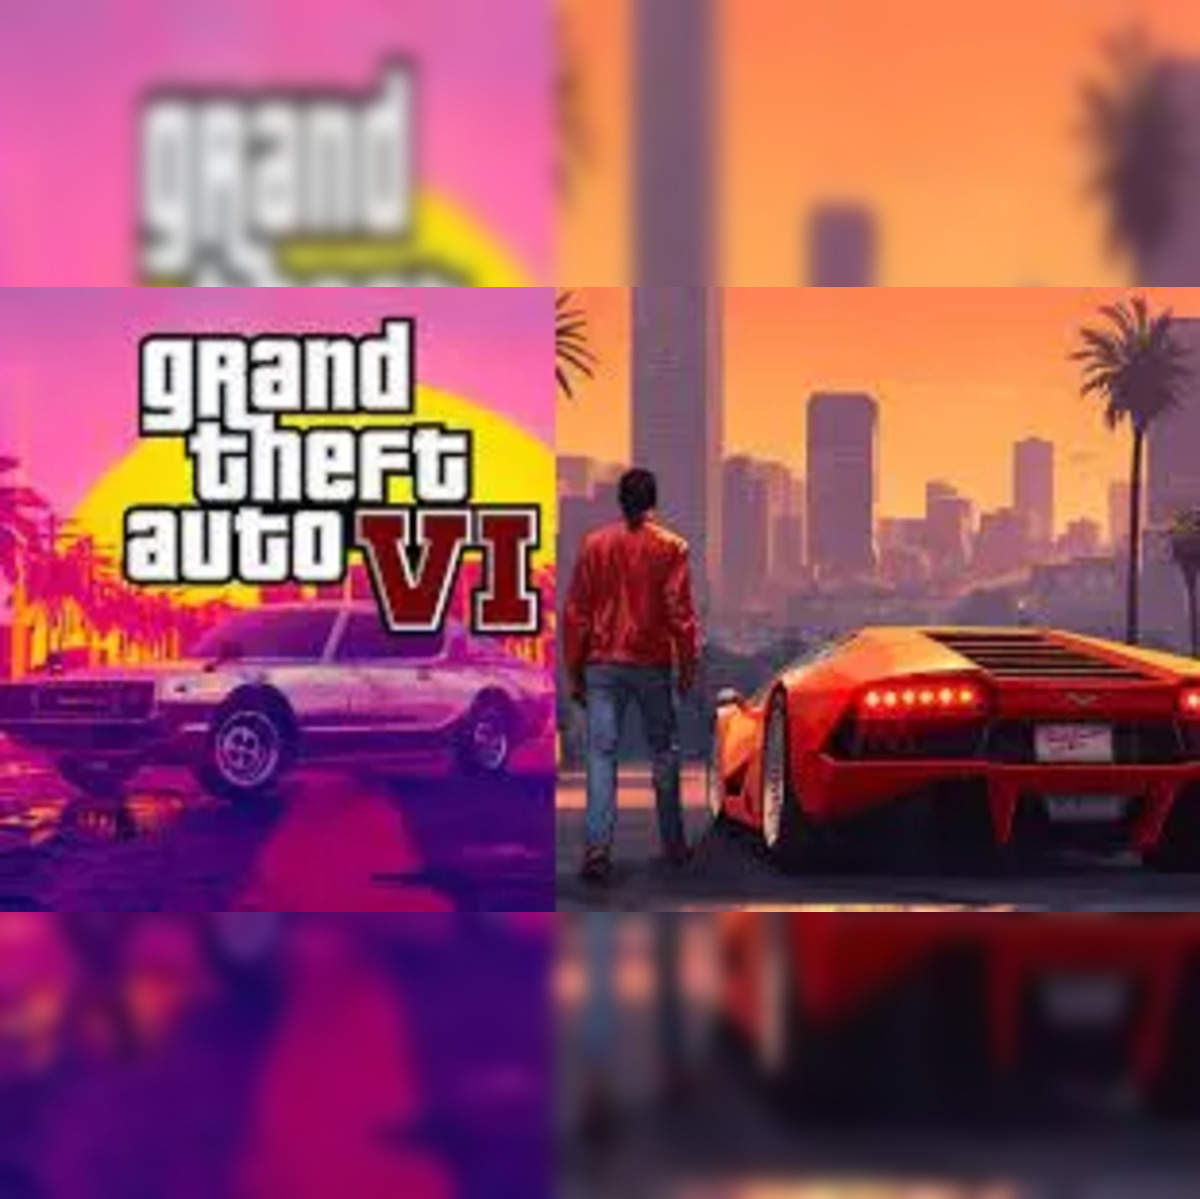 Grand Theft Auto III: 10 Year Anniversary Edition - Official Launch Trailer  